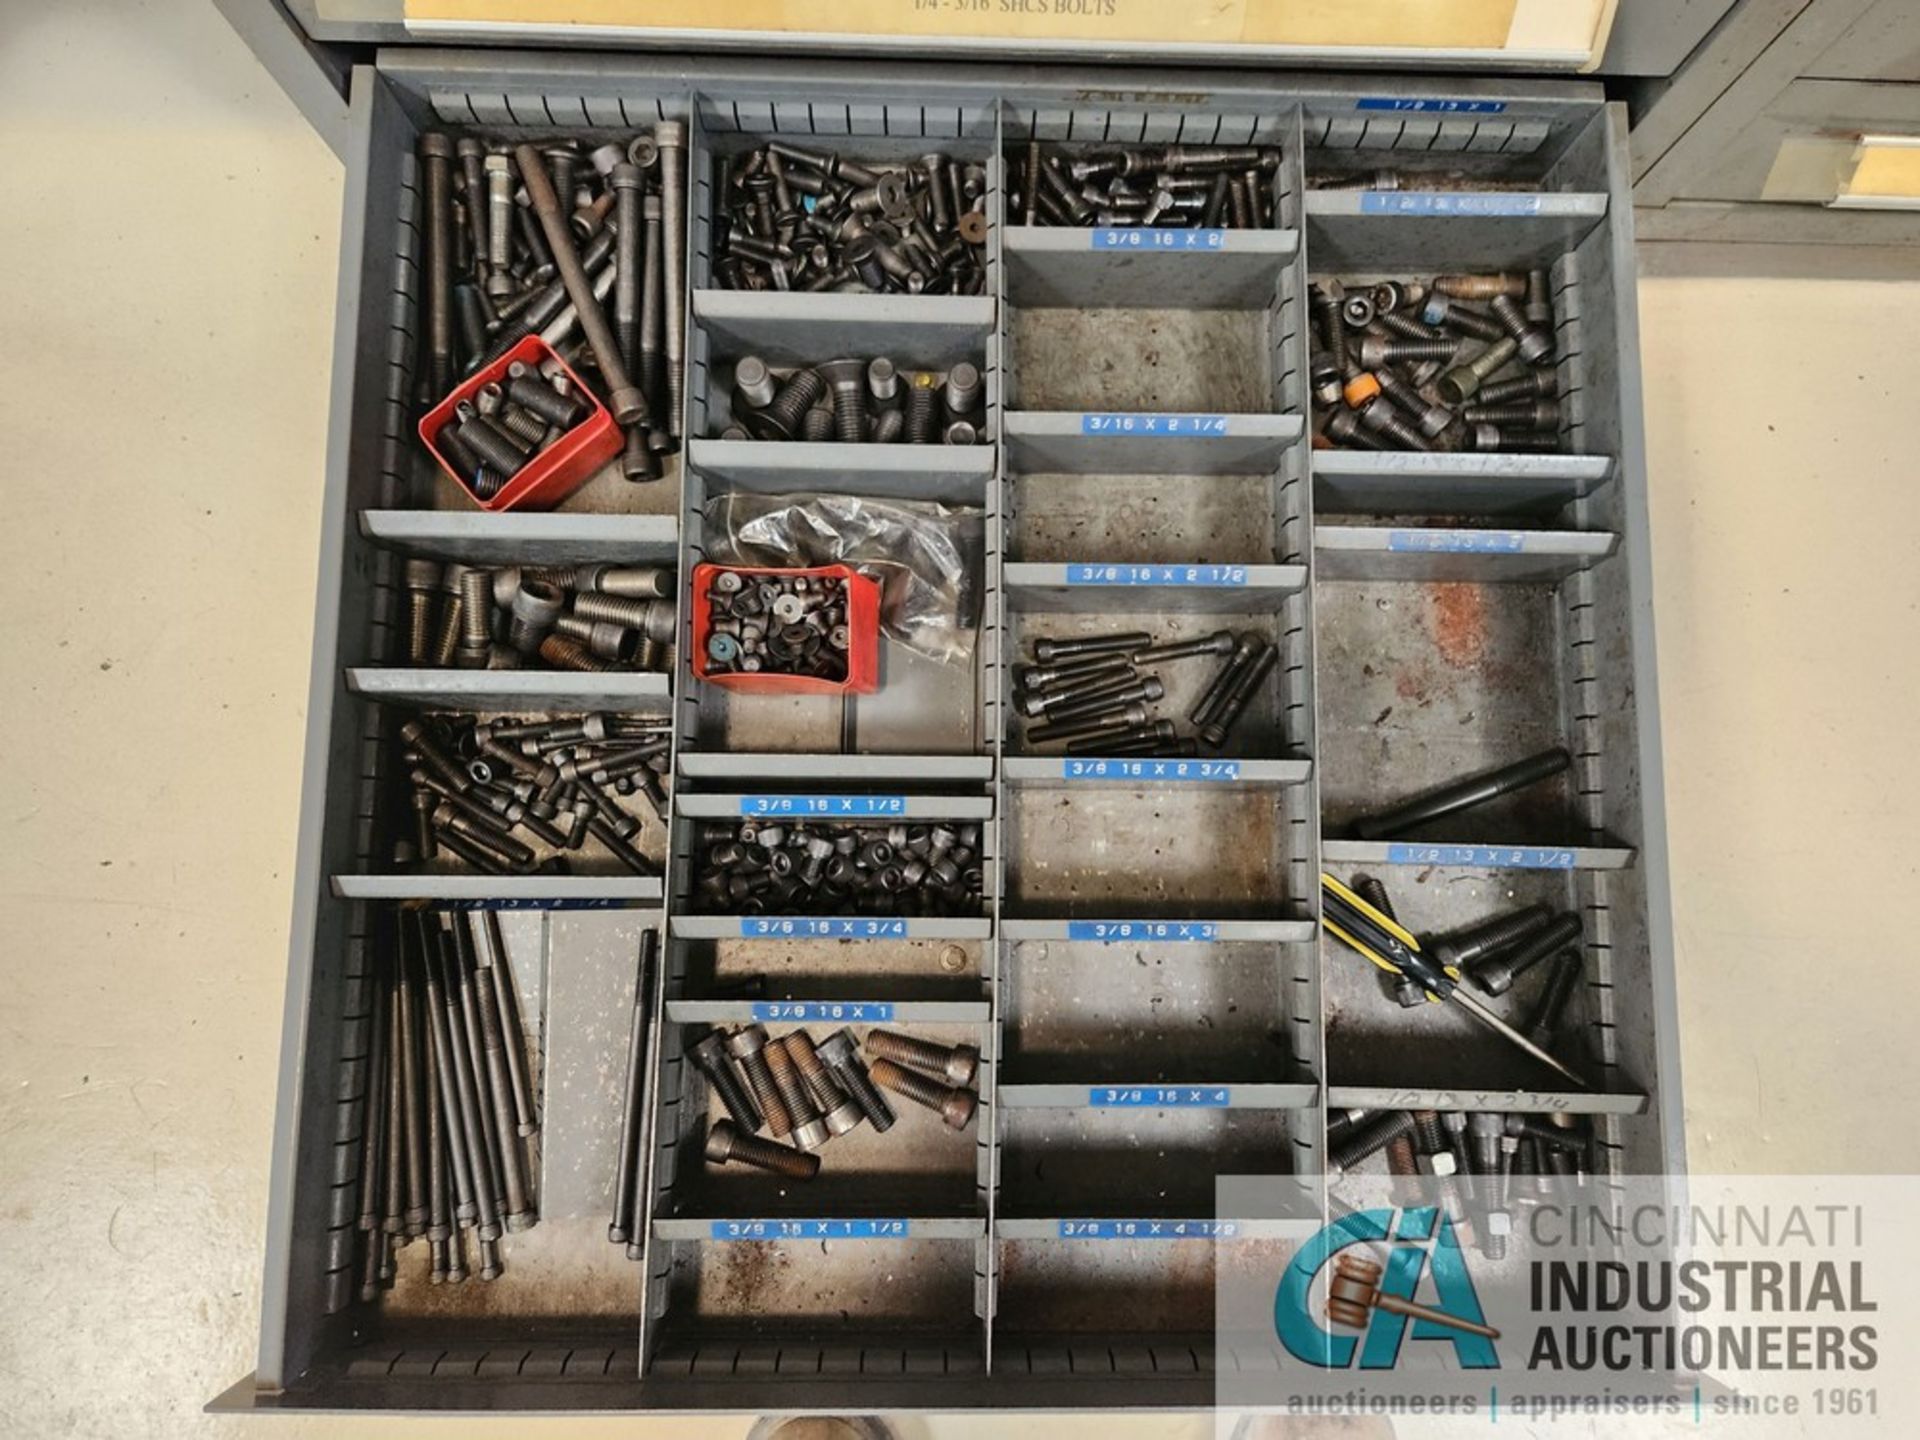 12-DRAWER STANLEY VIDMAR TOOLING CABINET W/ DOWELL & ROLL PINS, DRILLS, MORSE TAPER DRILLS, HEX - Image 14 of 14